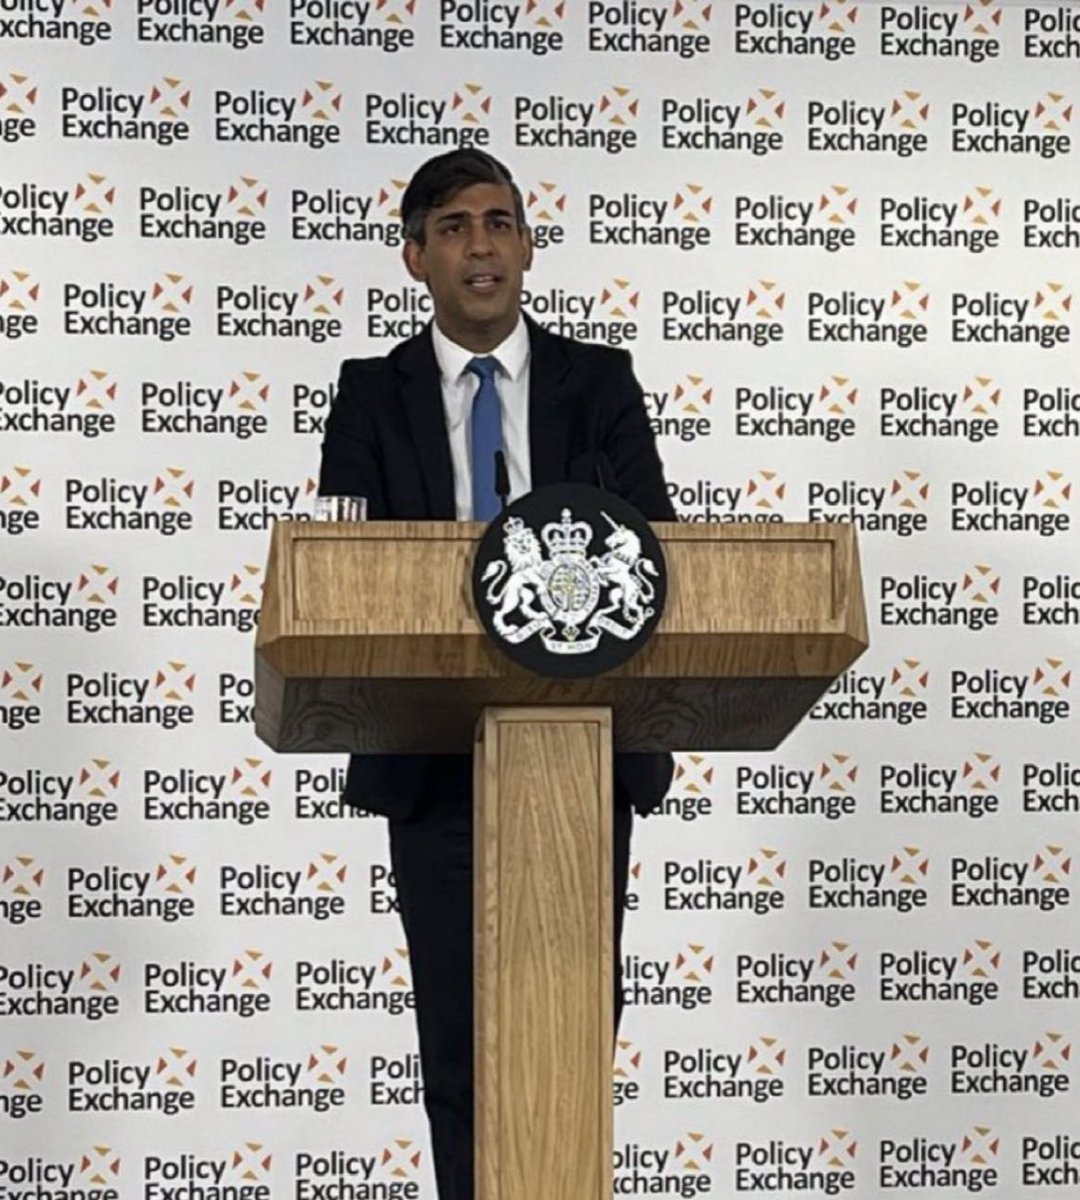 Today @RishiSunak (unelected PM) announced he #PintSizedLoser was a safe pair of hands, backed up by further announcements from Minister of State for Lanyards @EstherMcVey1 that rainbow #Lanyard would be banned ✌️
I think they’re taking the piss #GeneralElectionlNow